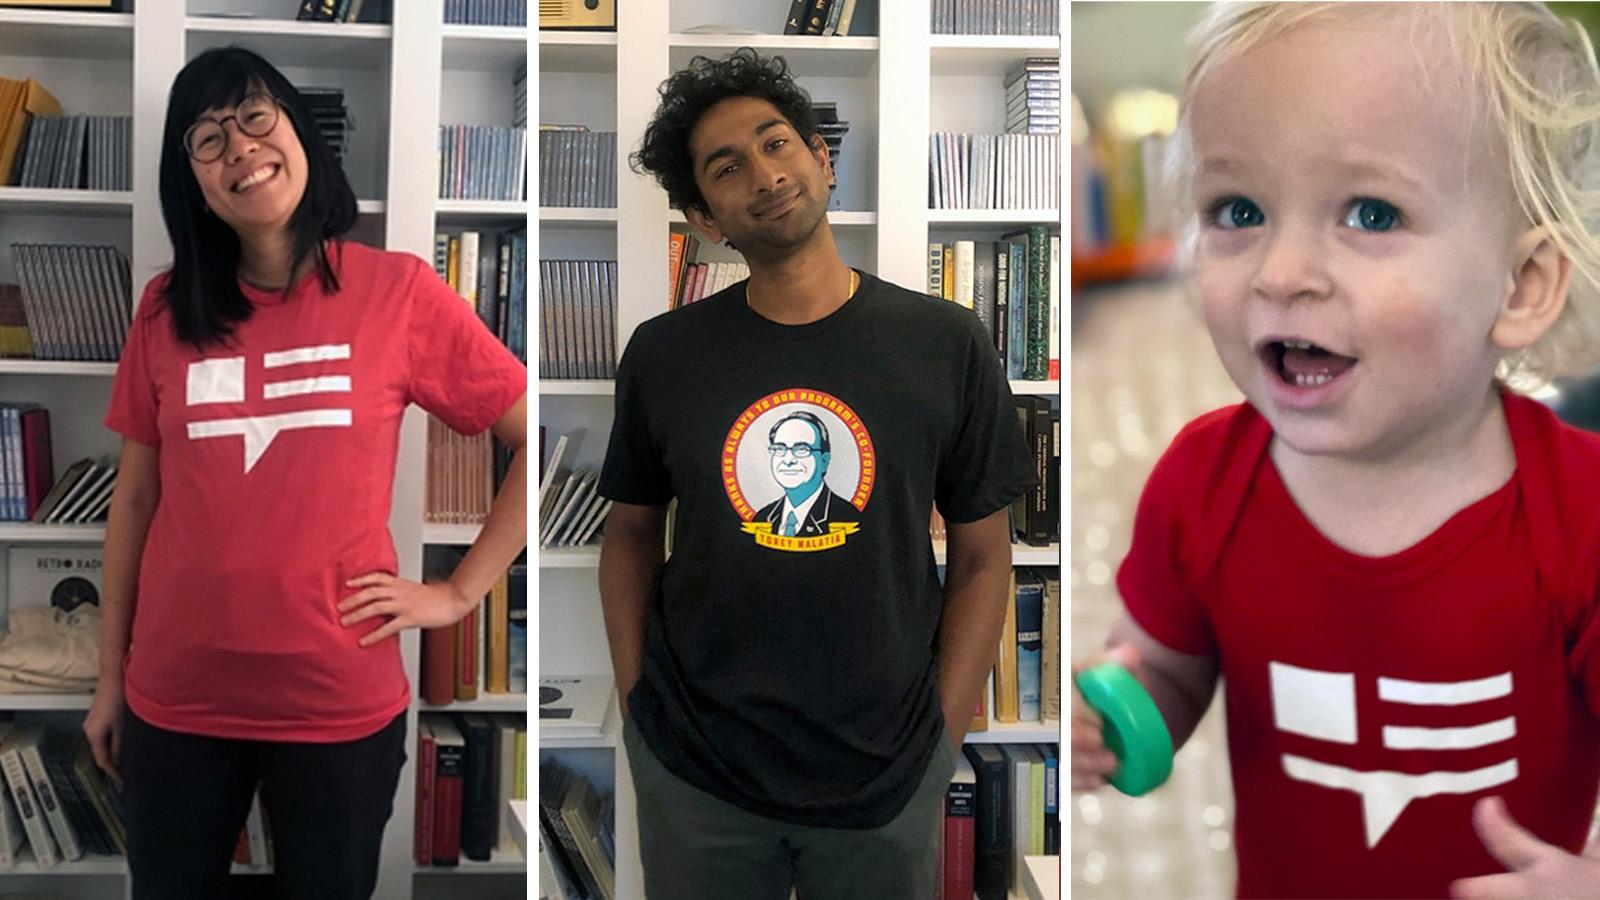 Three people modeling This American Life clothing: red t-shirt, Torey t-shirt, and a baby onesie.